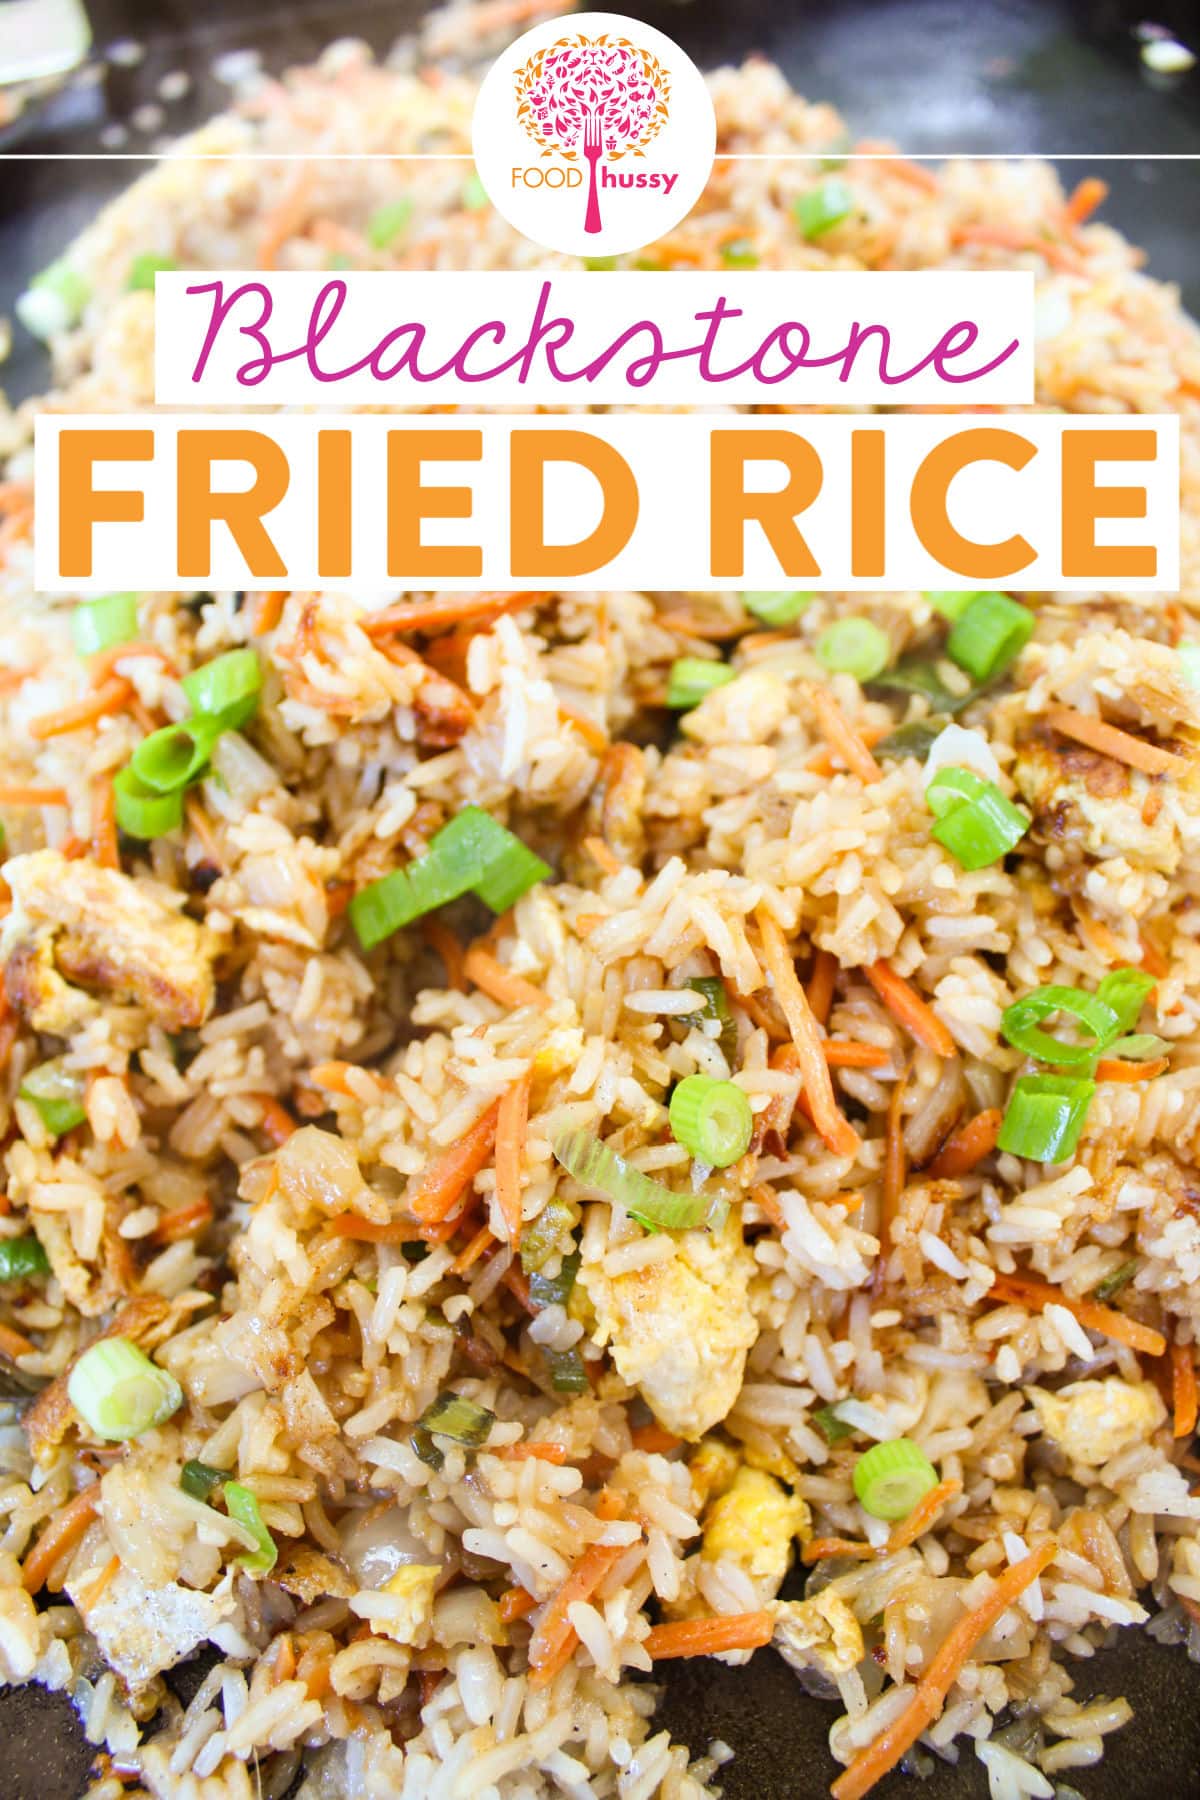 Making Fried Rice on the Blackstone is fun and delicious! Luckily - it's easy too! This fried rice tastes just like you get at your favorite hibachi or Chinese restaurant!   via @foodhussy